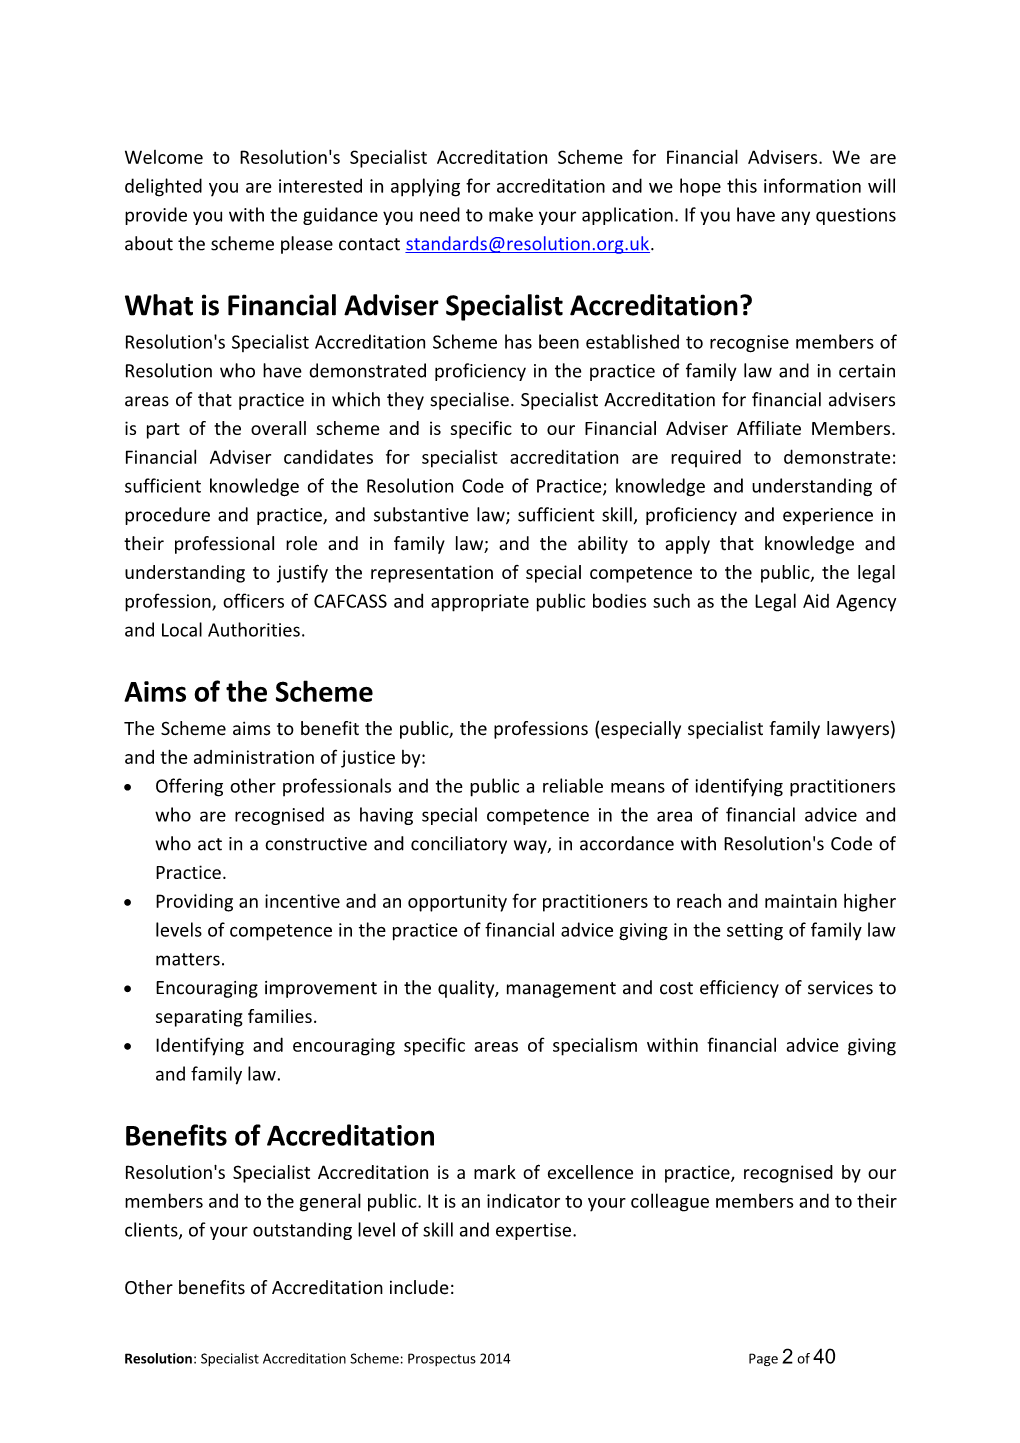 What Is Financial Adviser Specialist Accreditation?